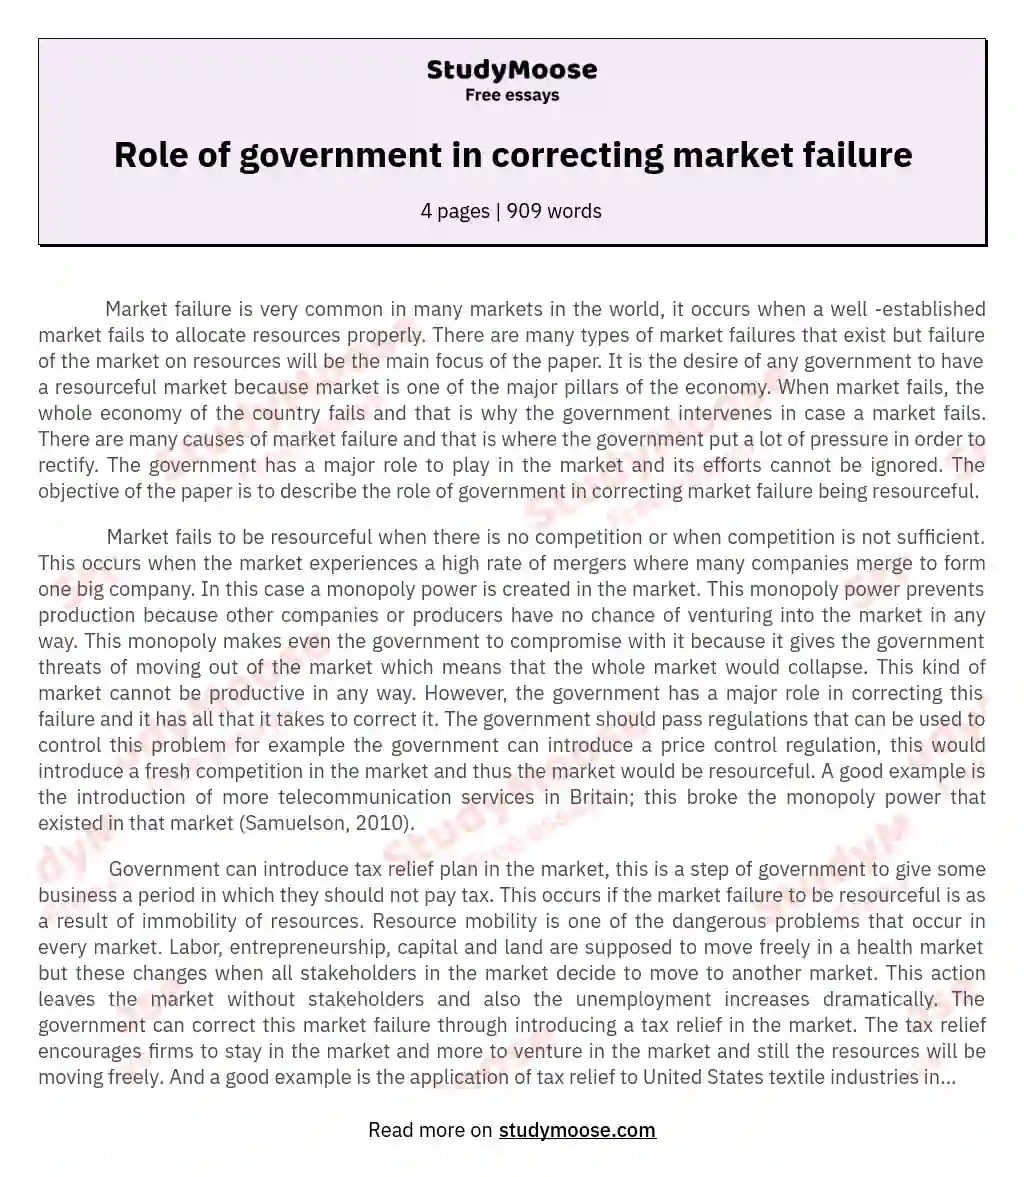 Role of government in correcting market failure essay